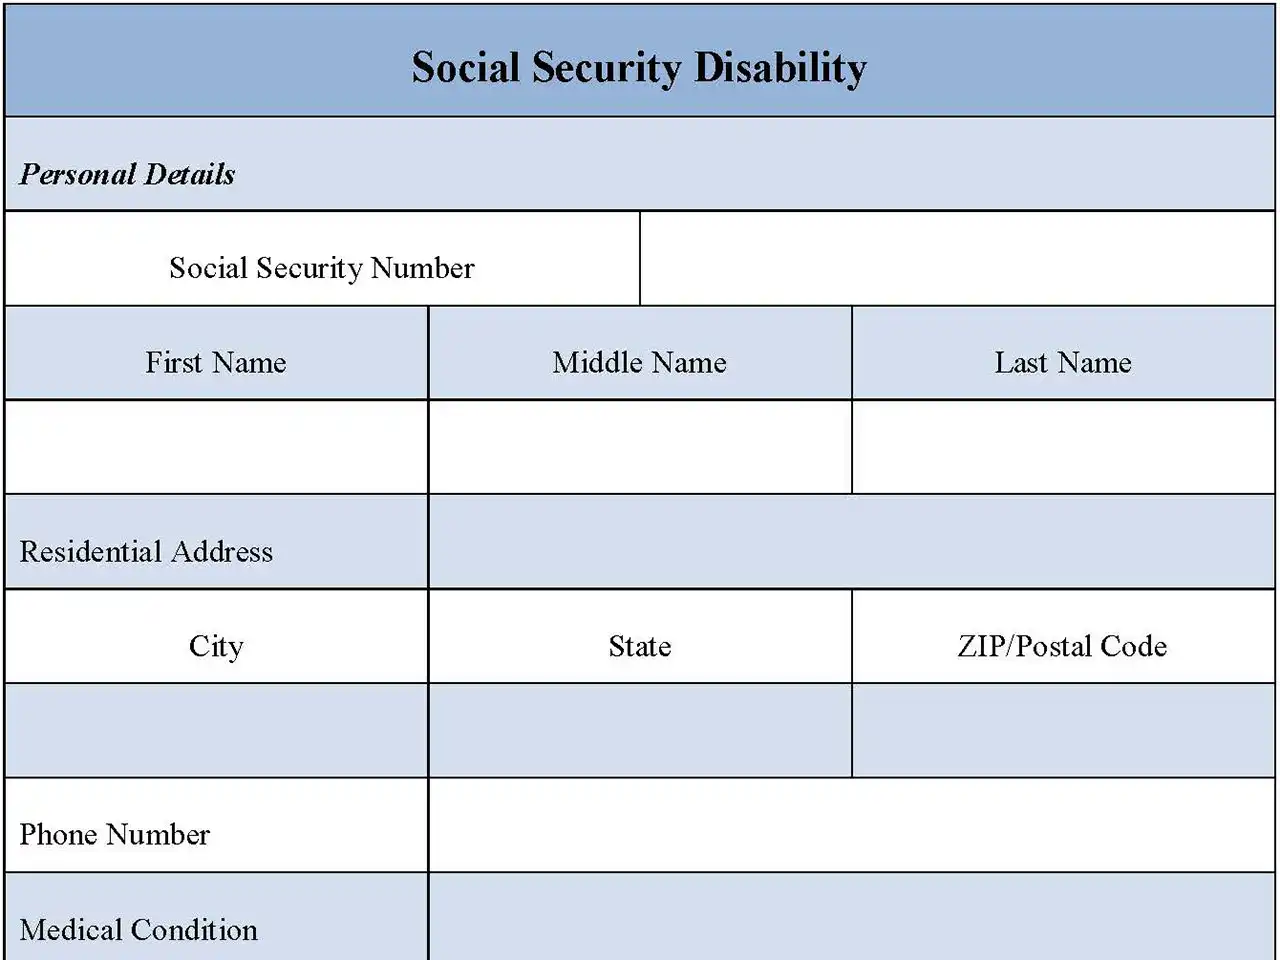 Social Security Disability application Form